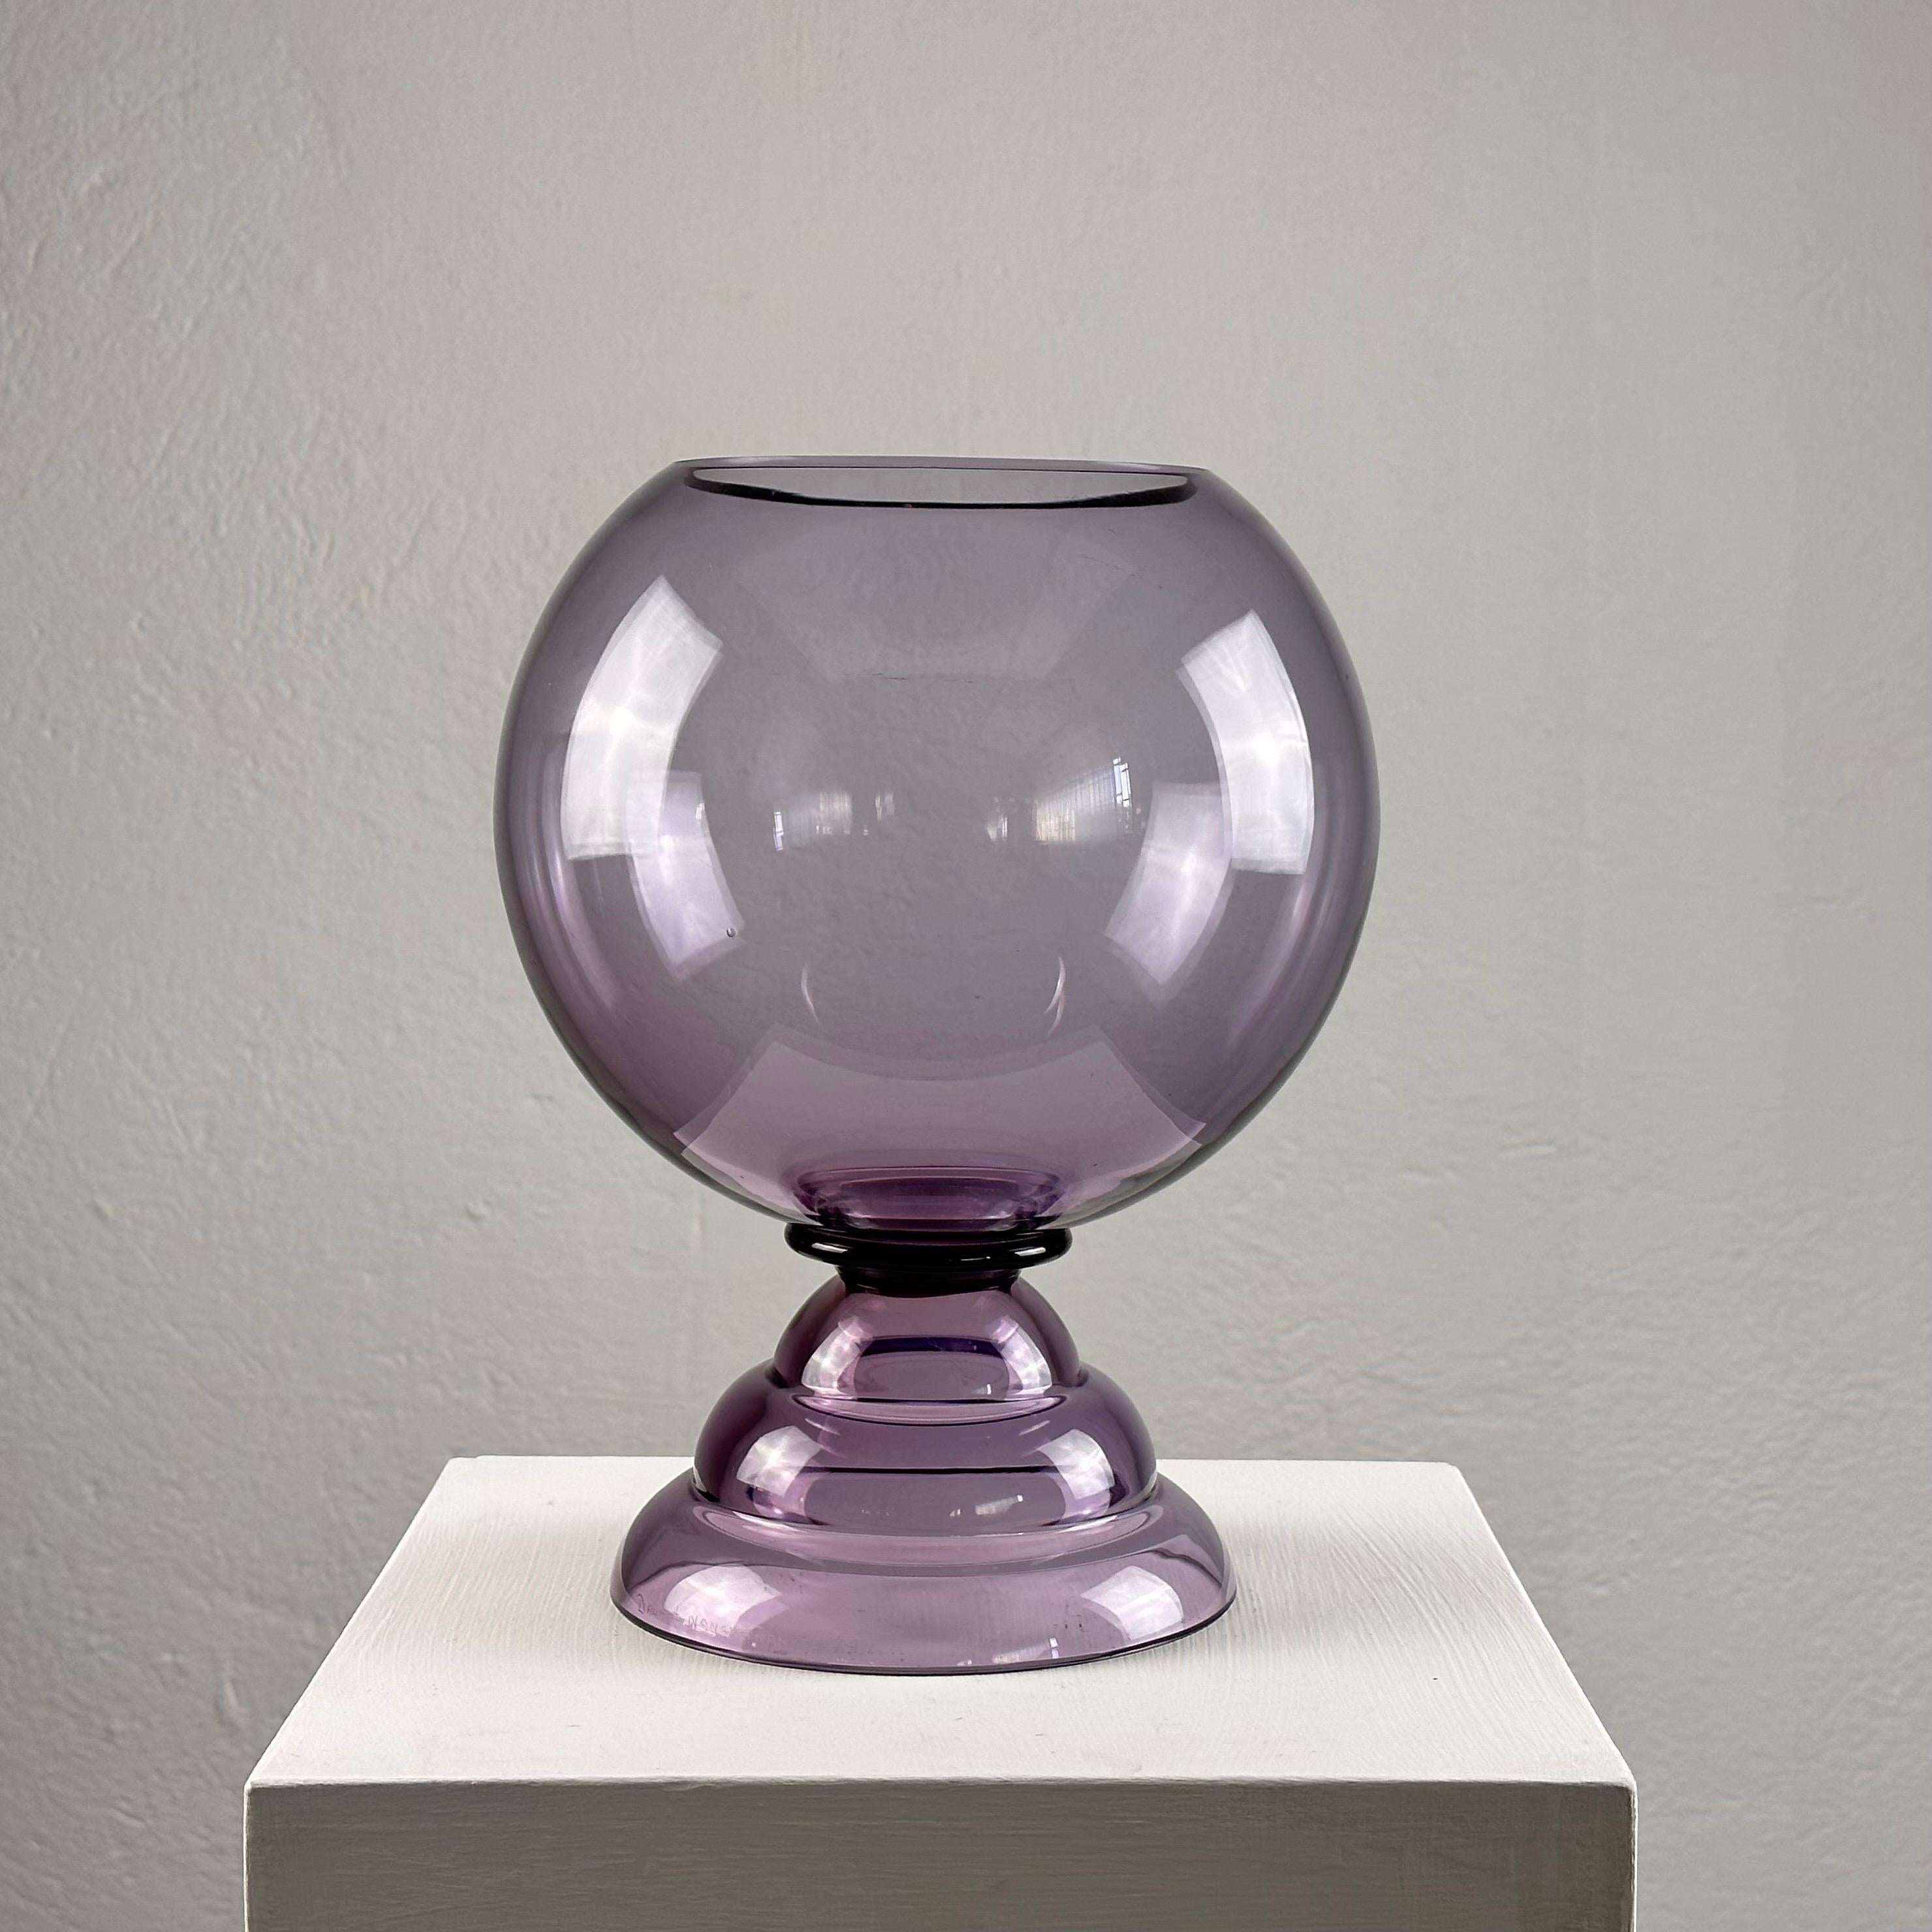 This large vase exudes timeless elegance and sophistication, showcasing Daum Nancy's legacy of exceptional craftsmanship and artistic mastery.

The vase features a mesmerizing purple color that adds a pop of vibrant beauty to any space. With its